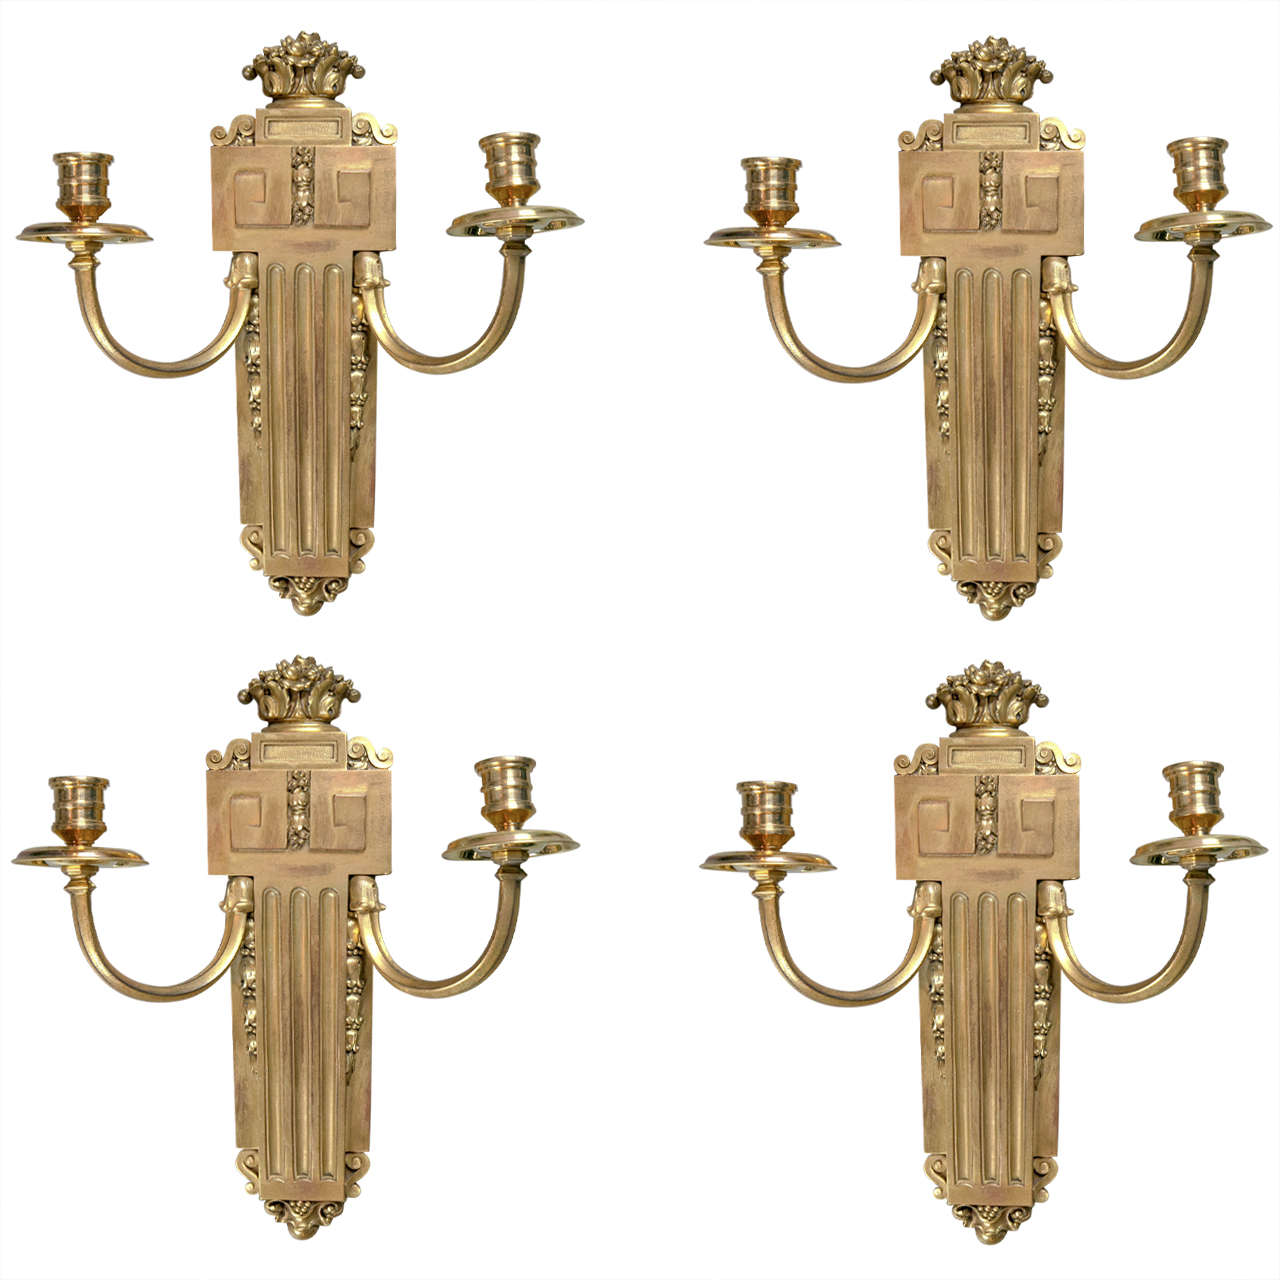 Pair of Neoclassical Style Caldwell Sconces